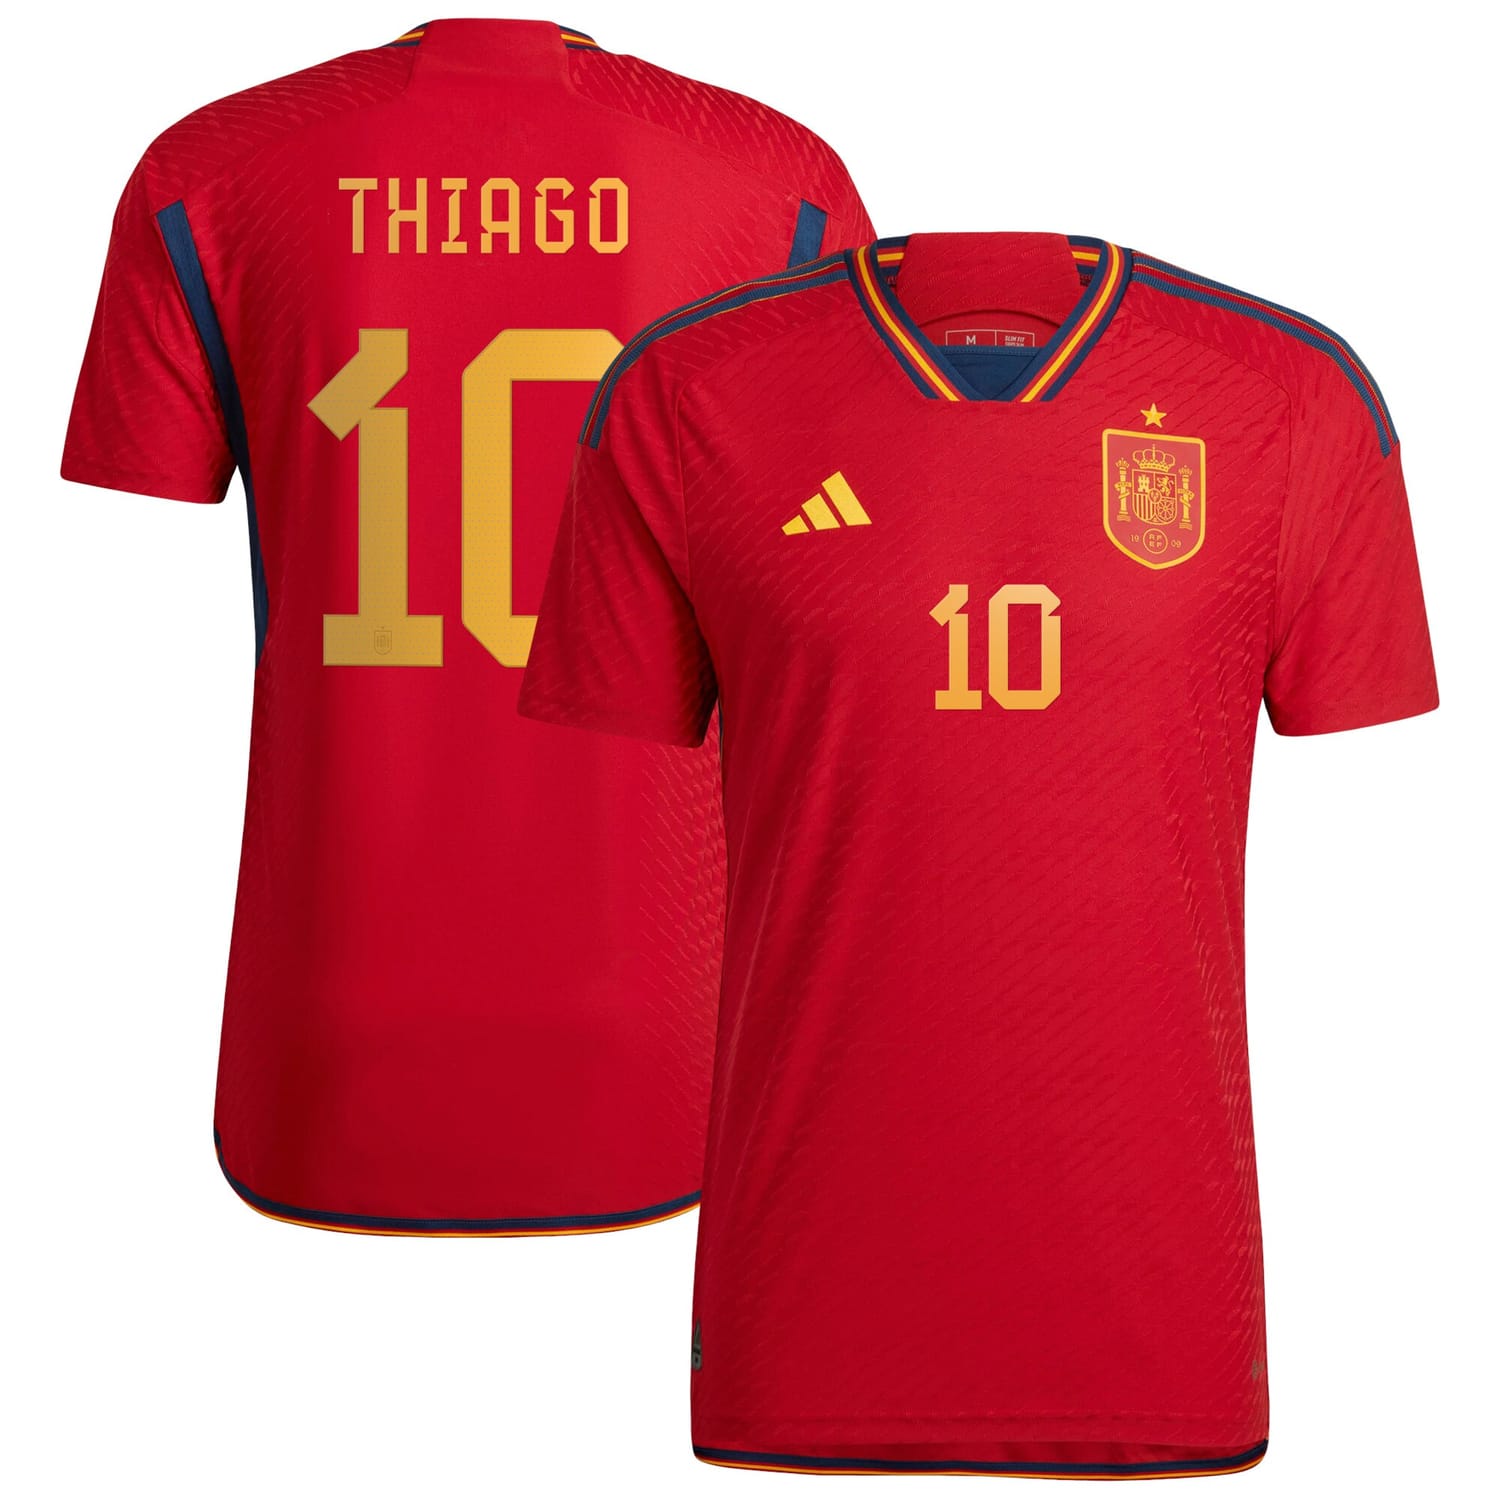 Spain National Team Home Authentic Jersey Shirt player Thiago 10 printing for Men